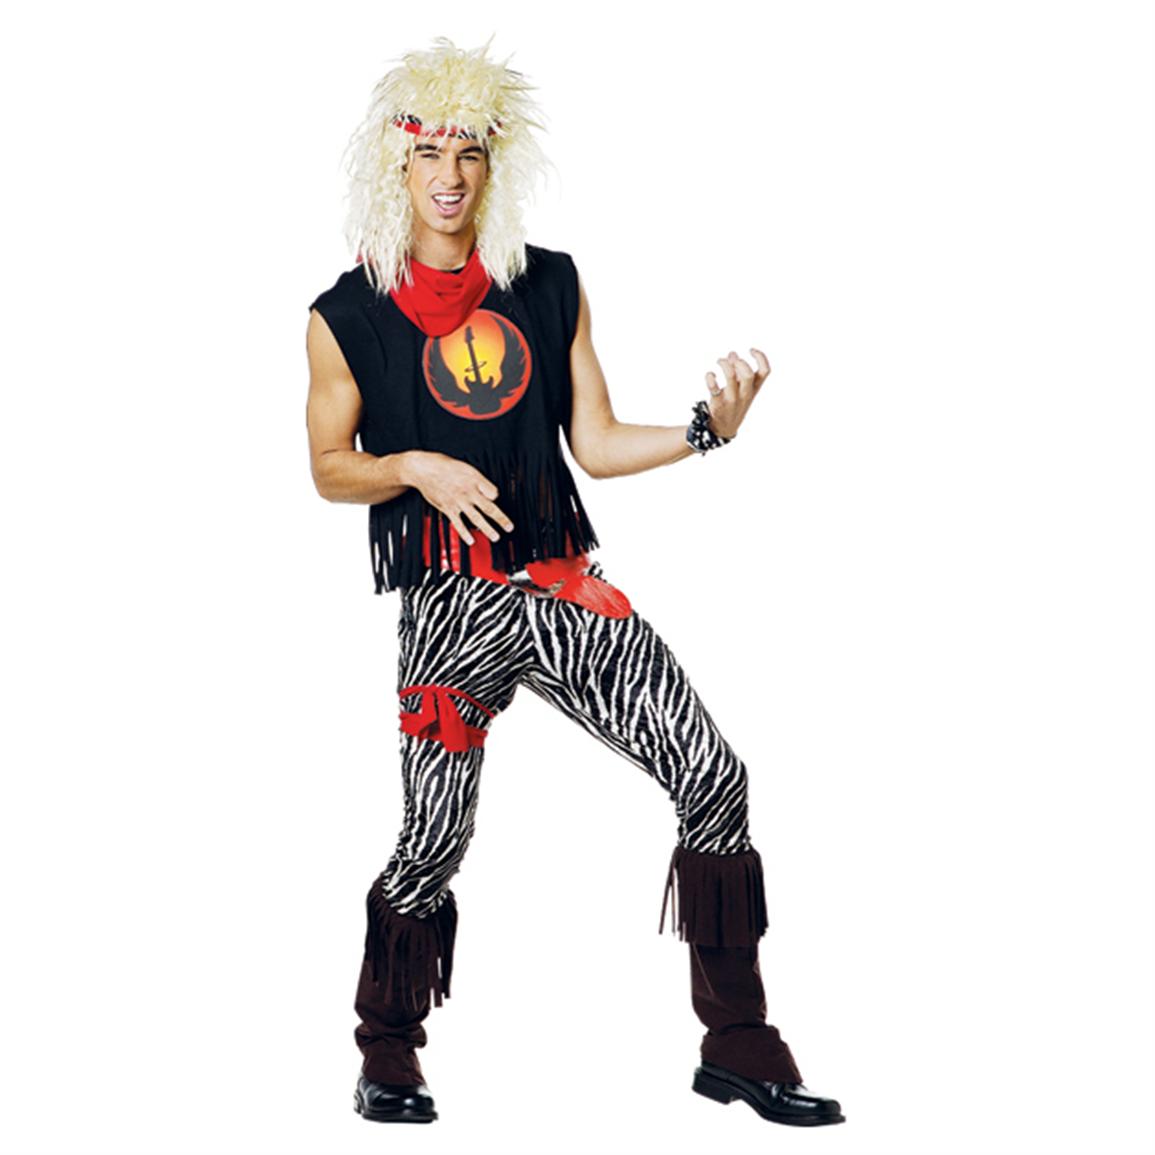 Adult 80s Rock God Costume - 193914, Costumes at Sportsman's Guide